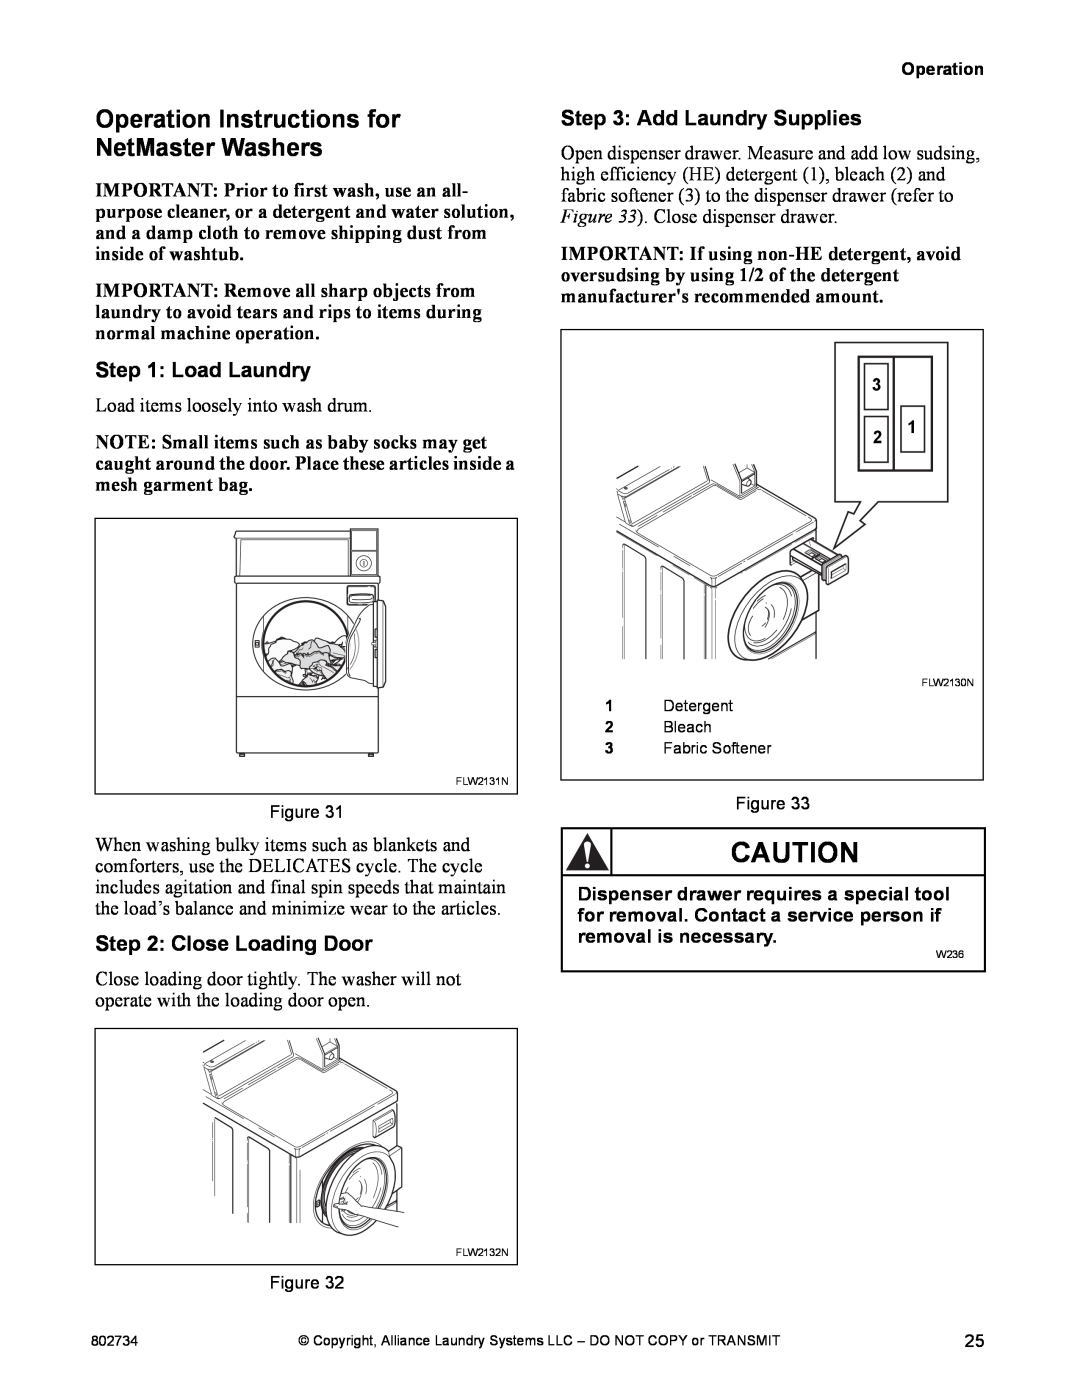 Alliance Laundry Systems FLW1526C manual Operation Instructions for NetMaster Washers, Load Laundry, Close Loading Door 